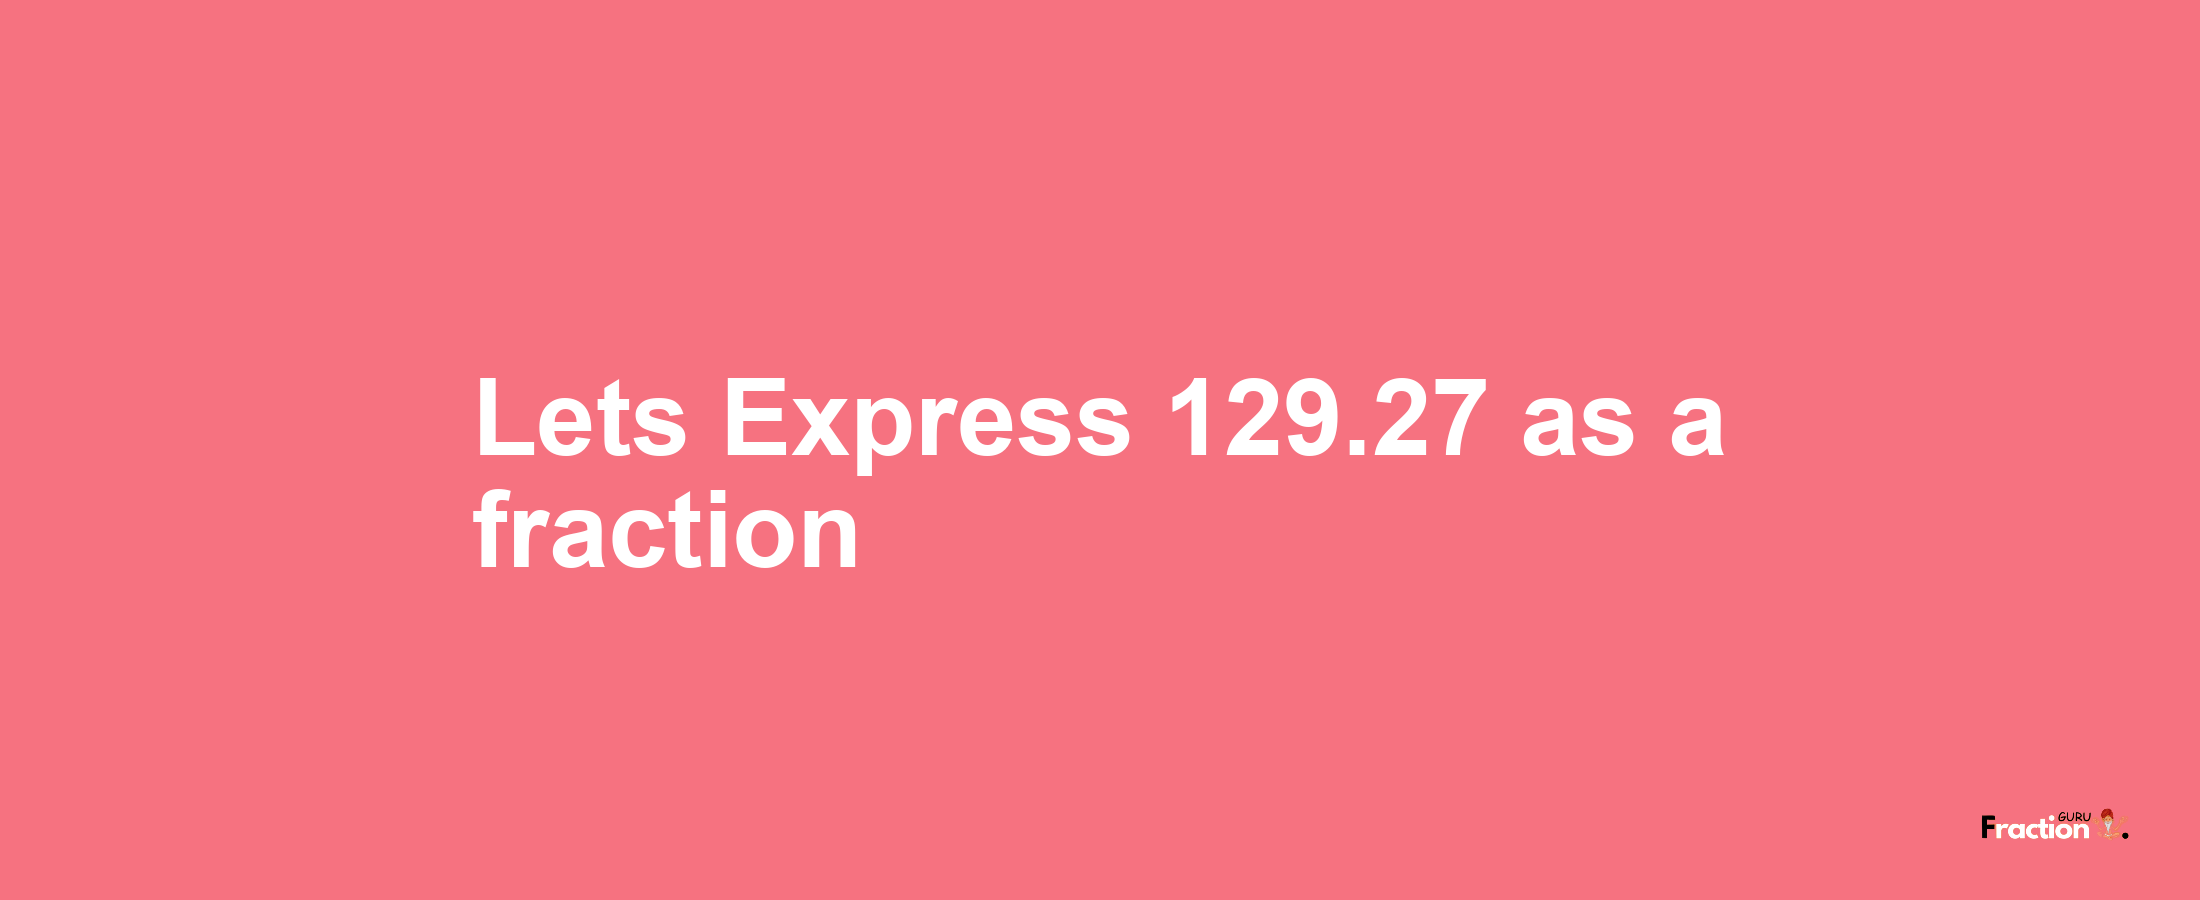 Lets Express 129.27 as afraction